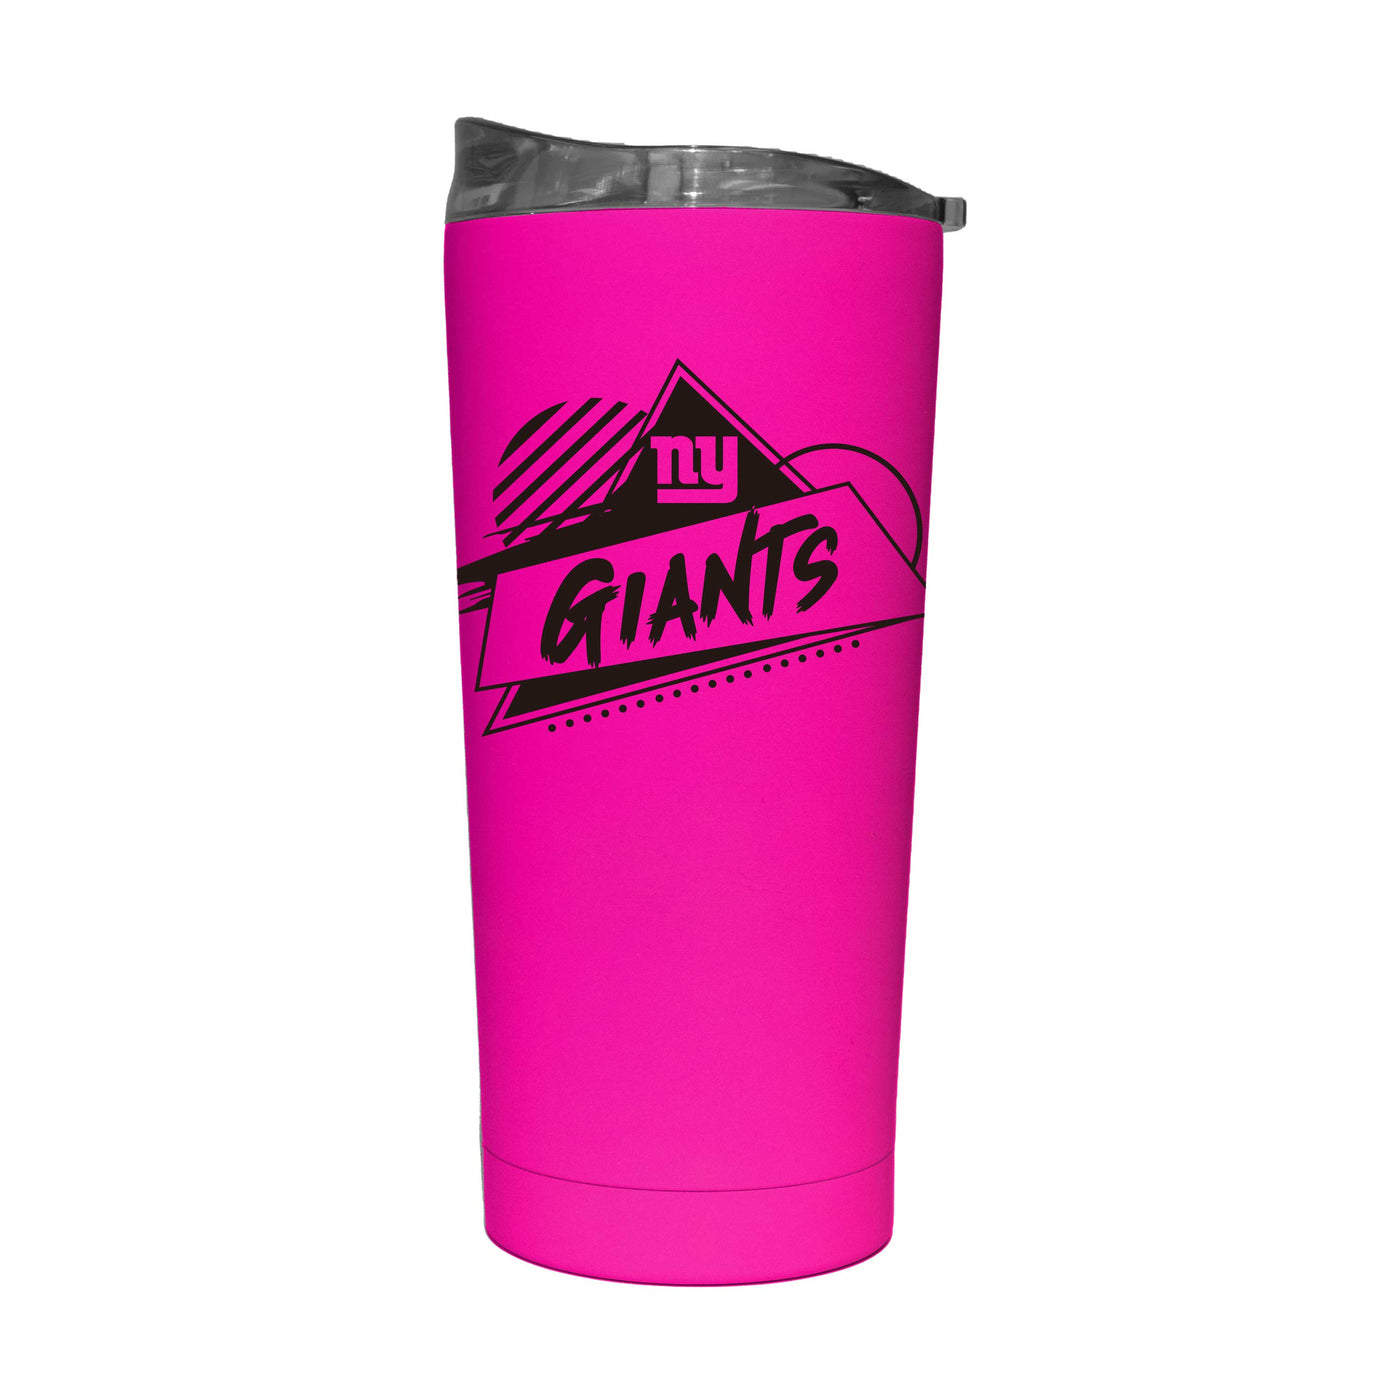 NY Giants 20oz Electric Rad Soft Touch Tumbler